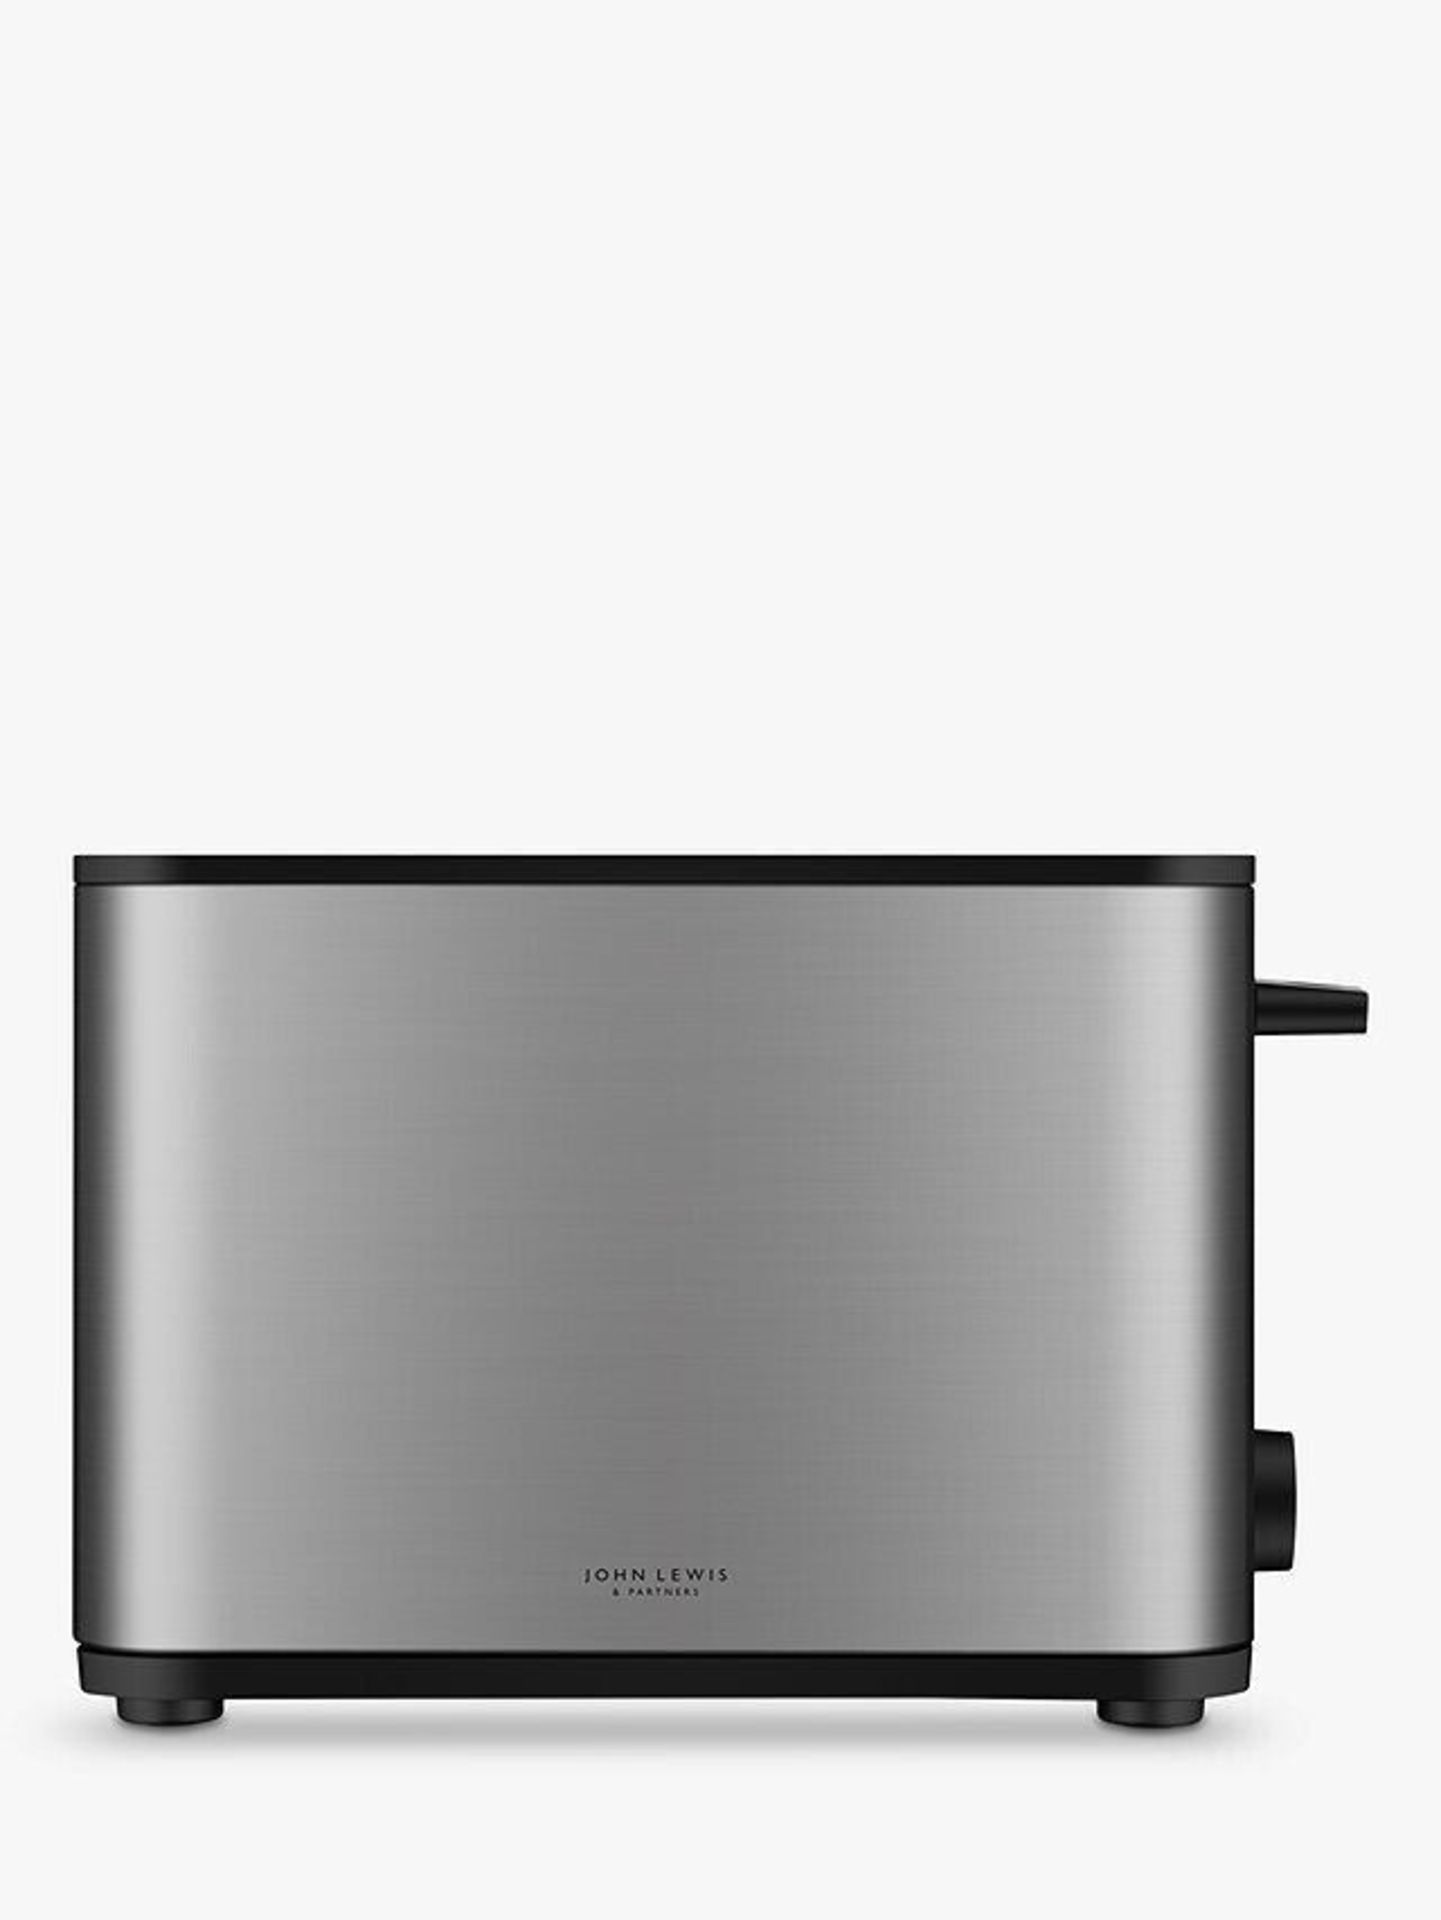 John Lewis Simplicity 2-Slice Toaster, Stainless Steel. - R10BW.